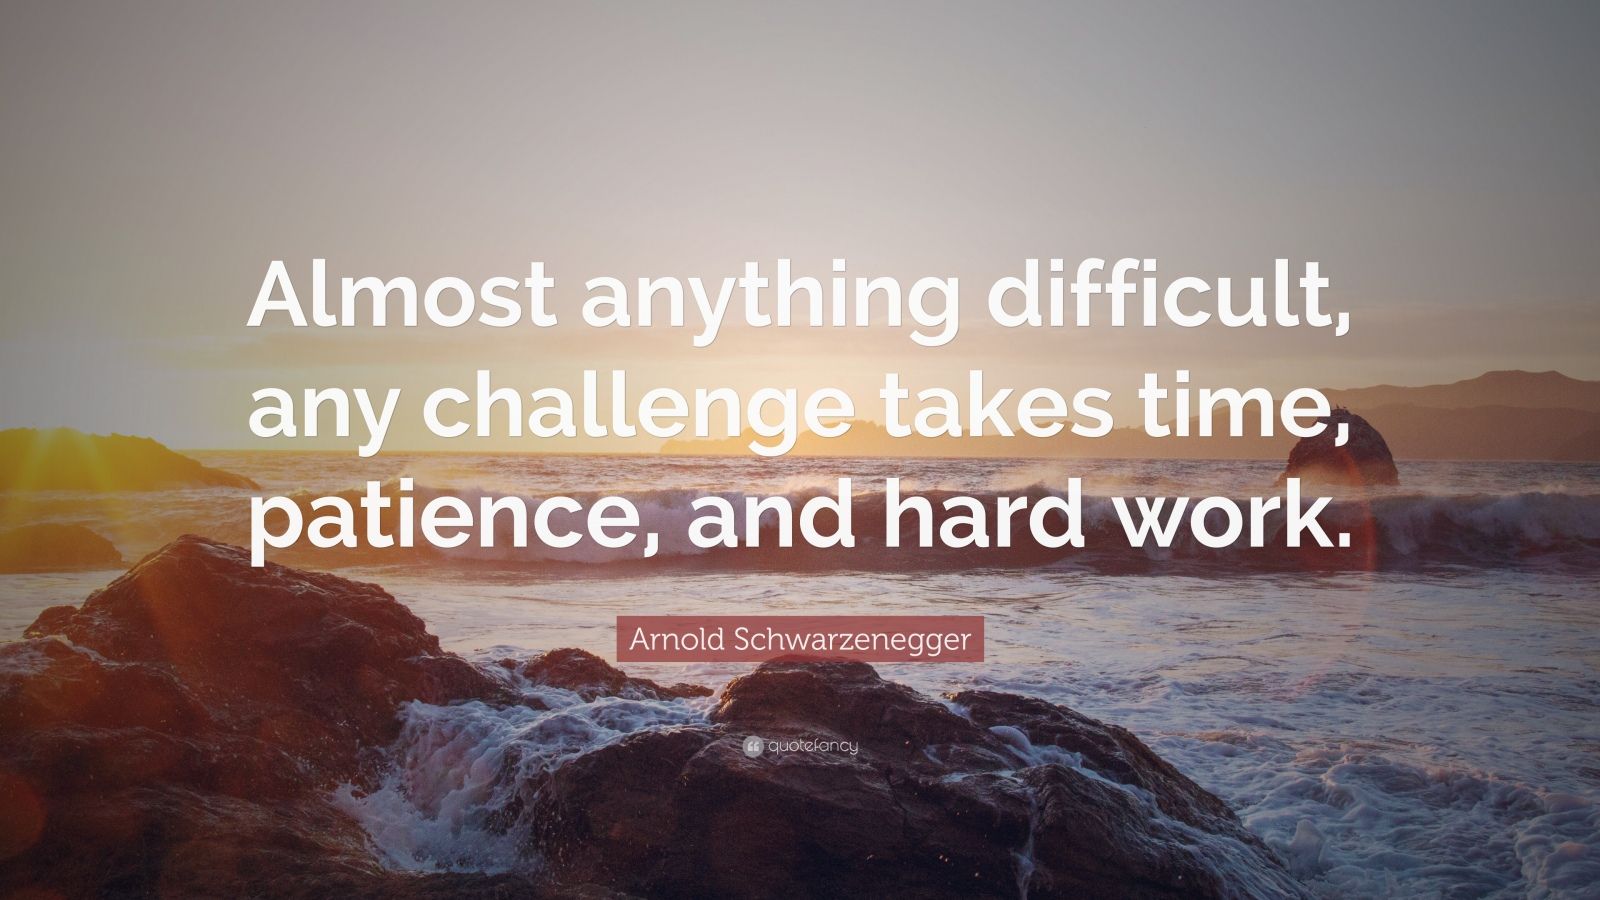 Arnold Schwarzenegger Quote “Almost anything difficult, any challenge